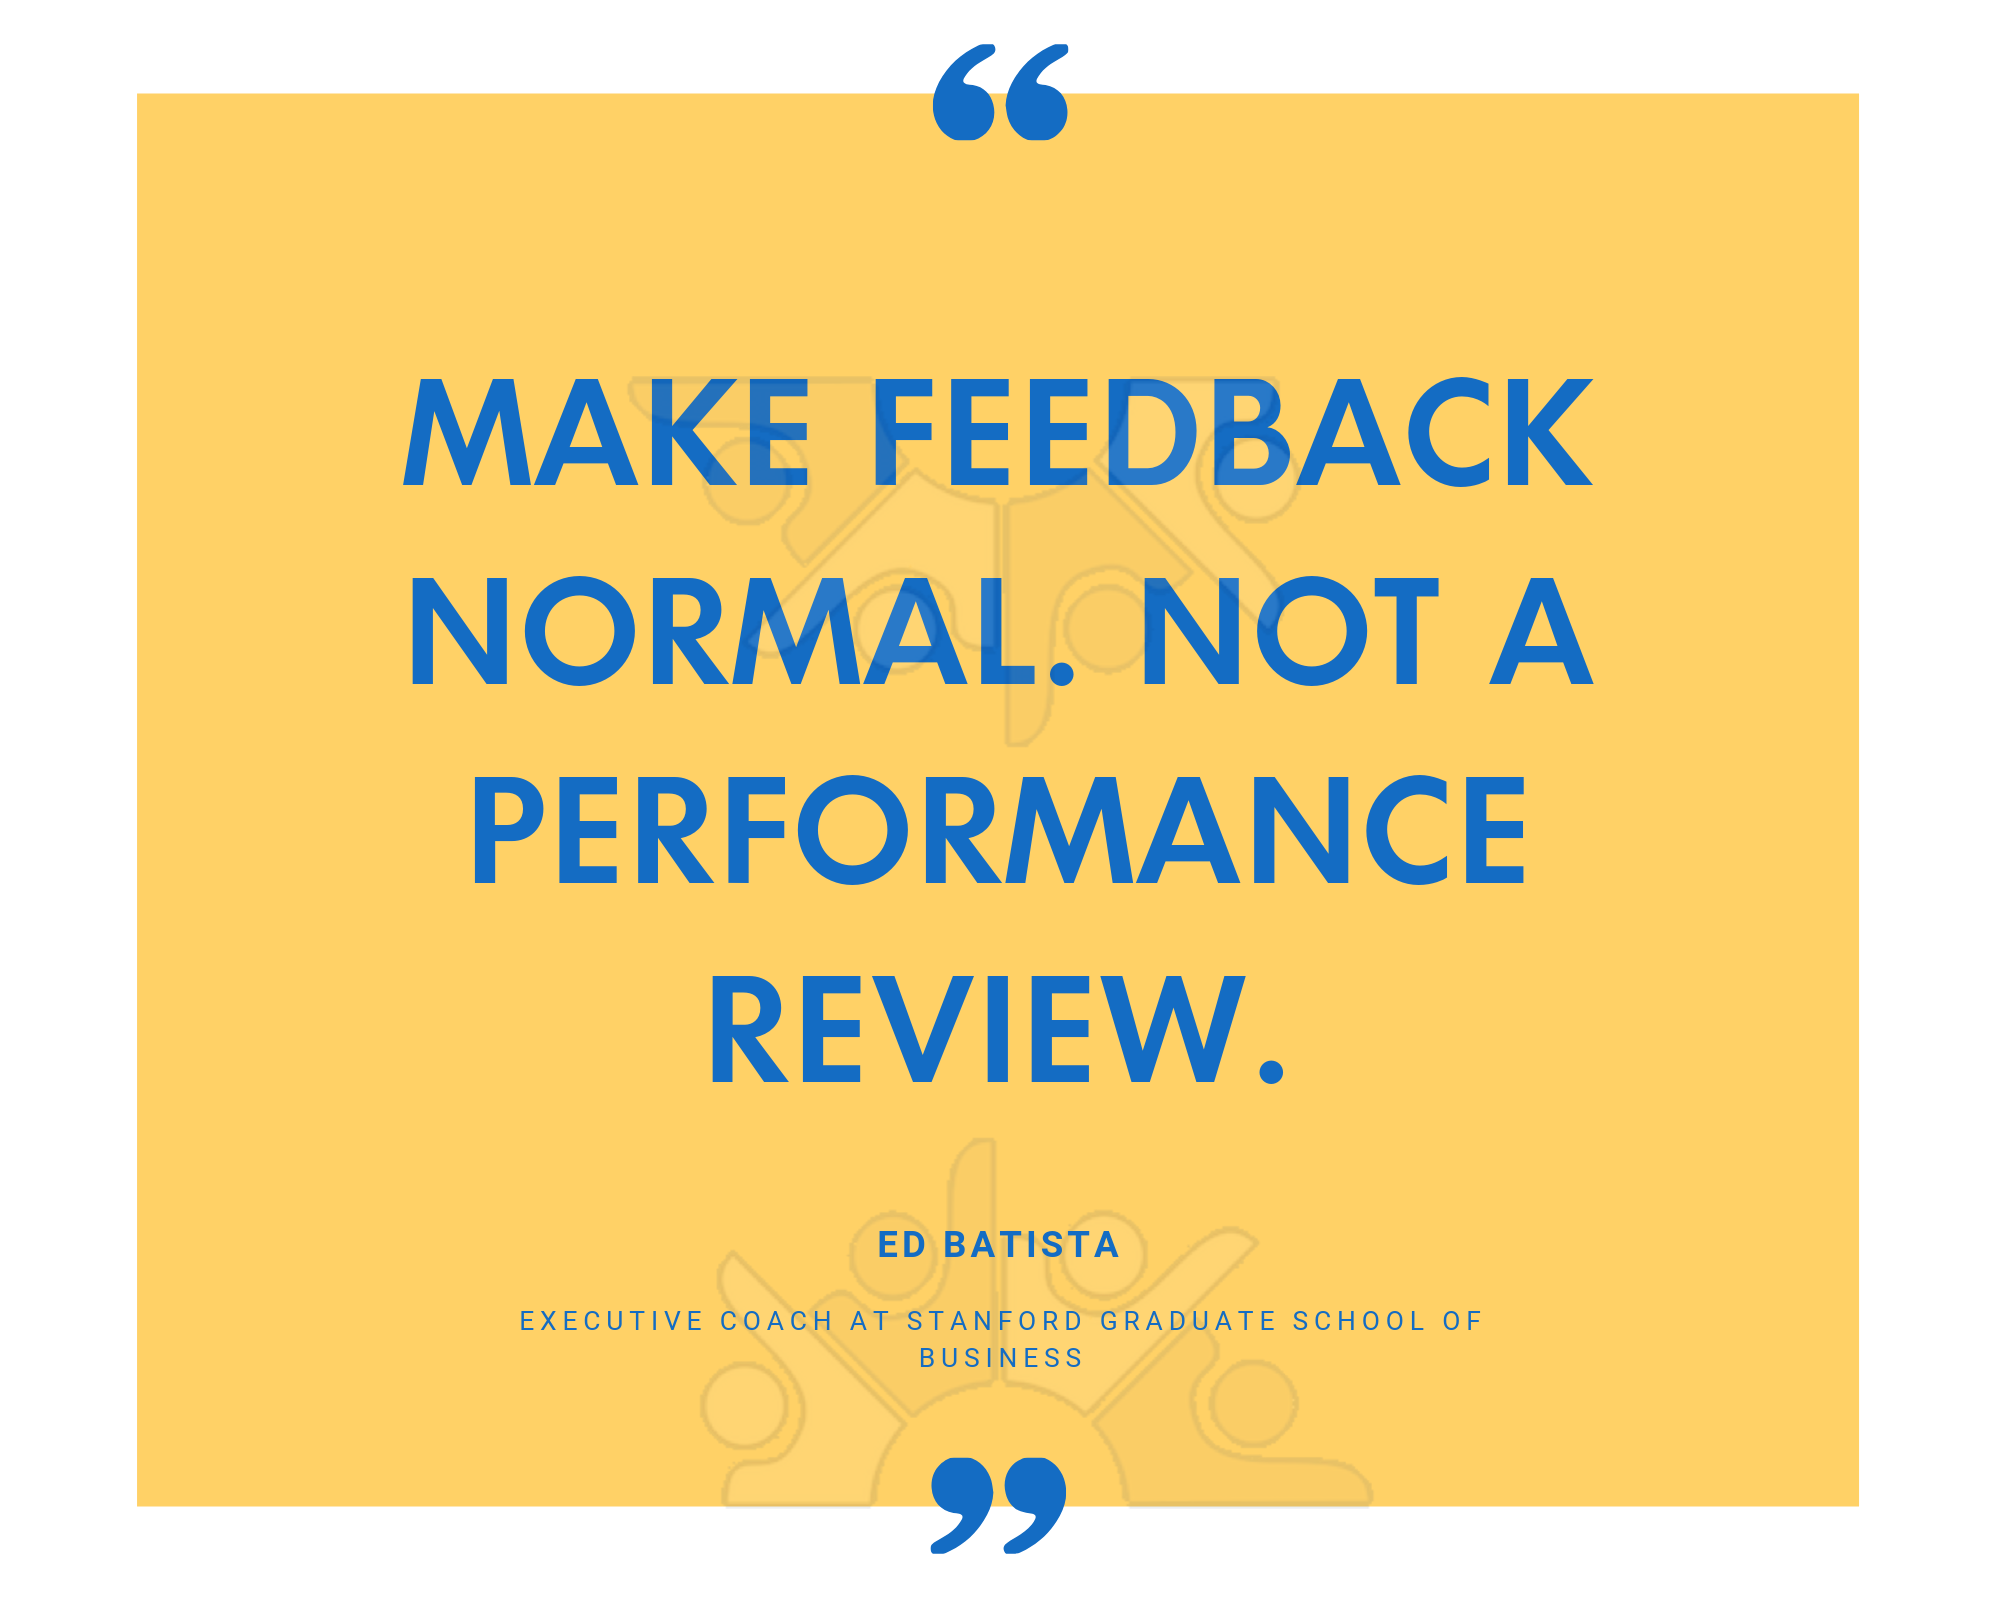 Make feedback normal. Not a performance review.